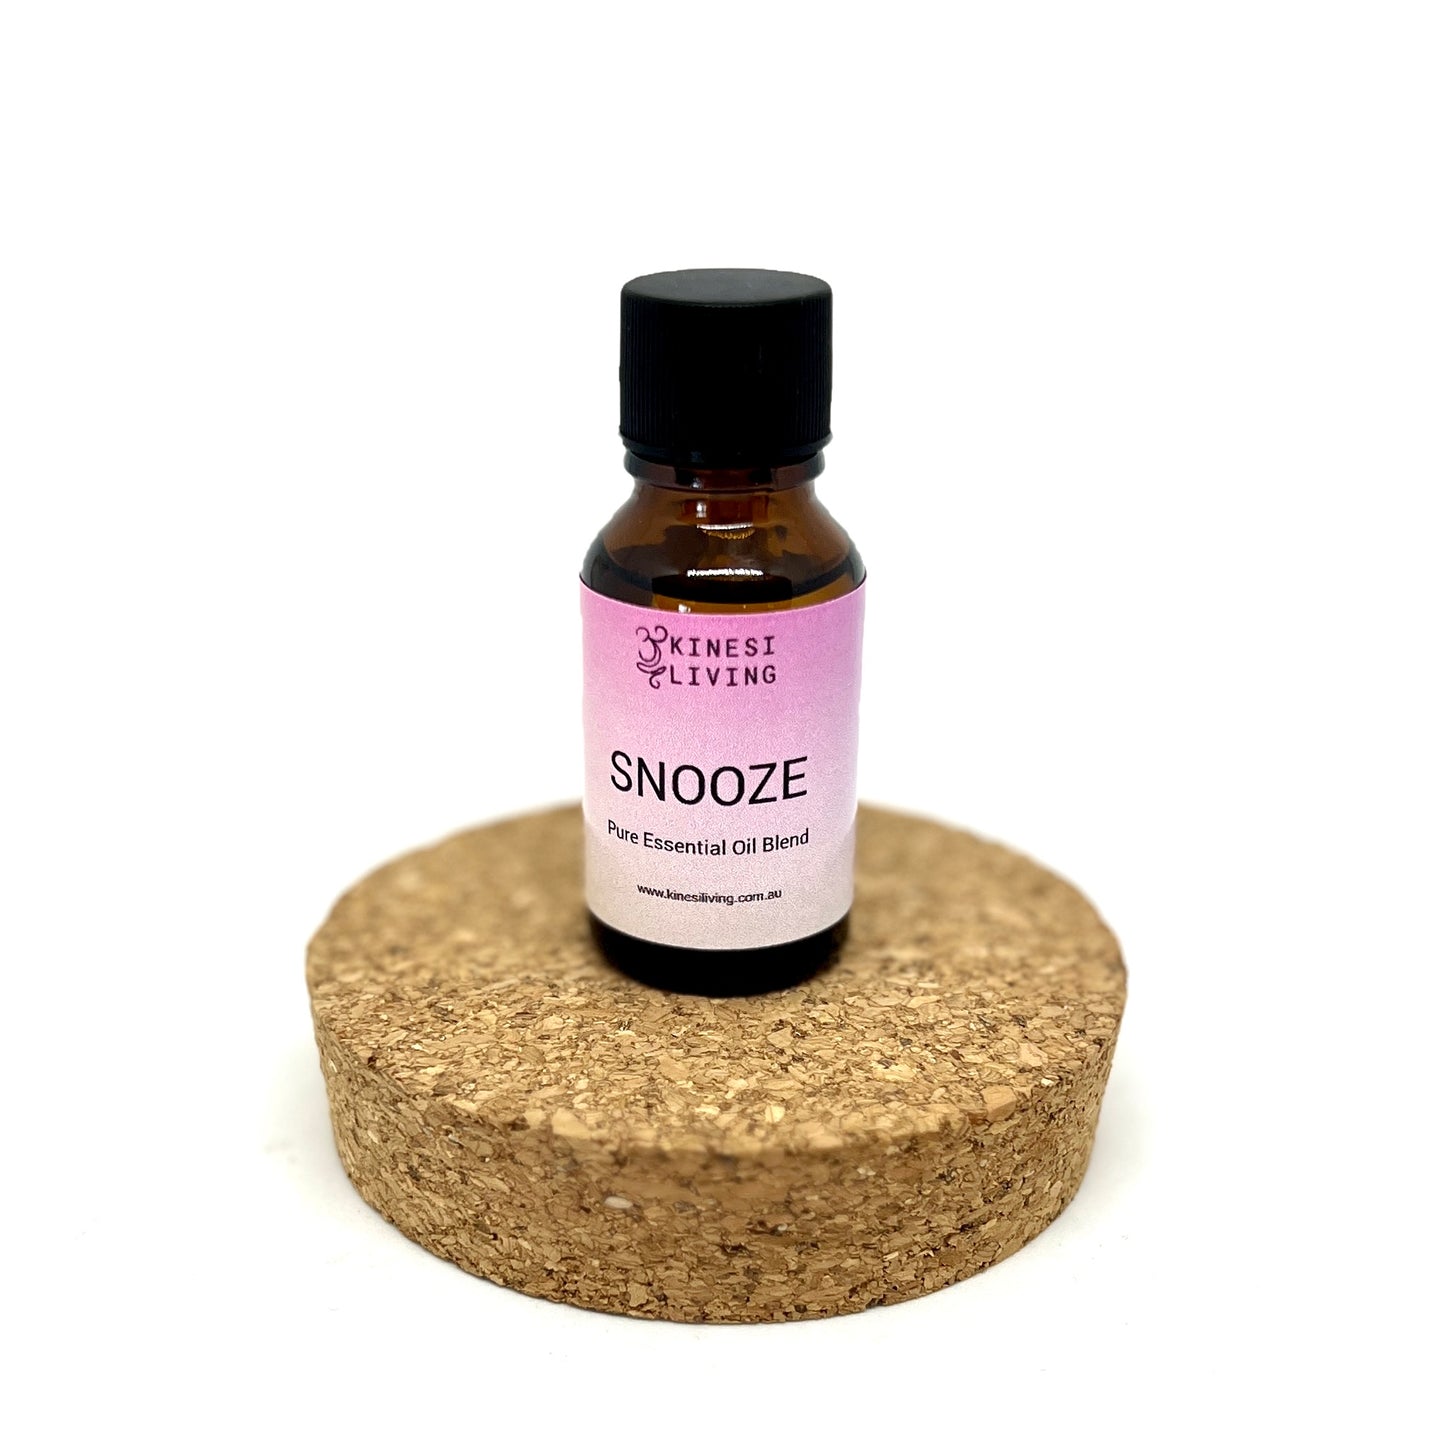 SNOOZE essential oil blend - 15ml